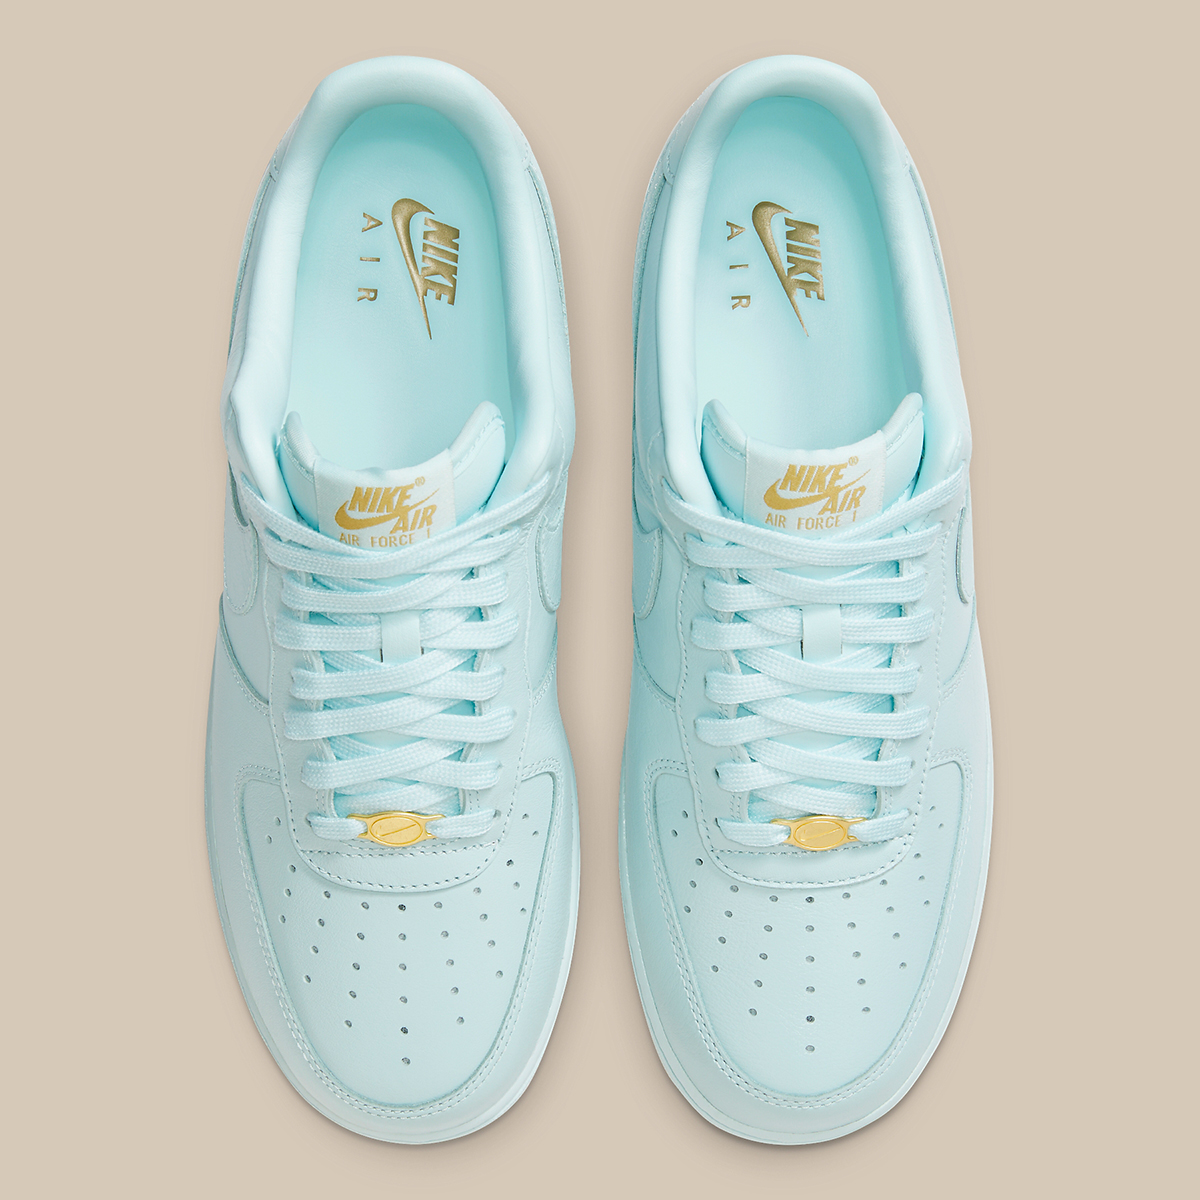 nike Air Force commercial 1 low glacier blue gum yellow metallic gold HF4933 400 5